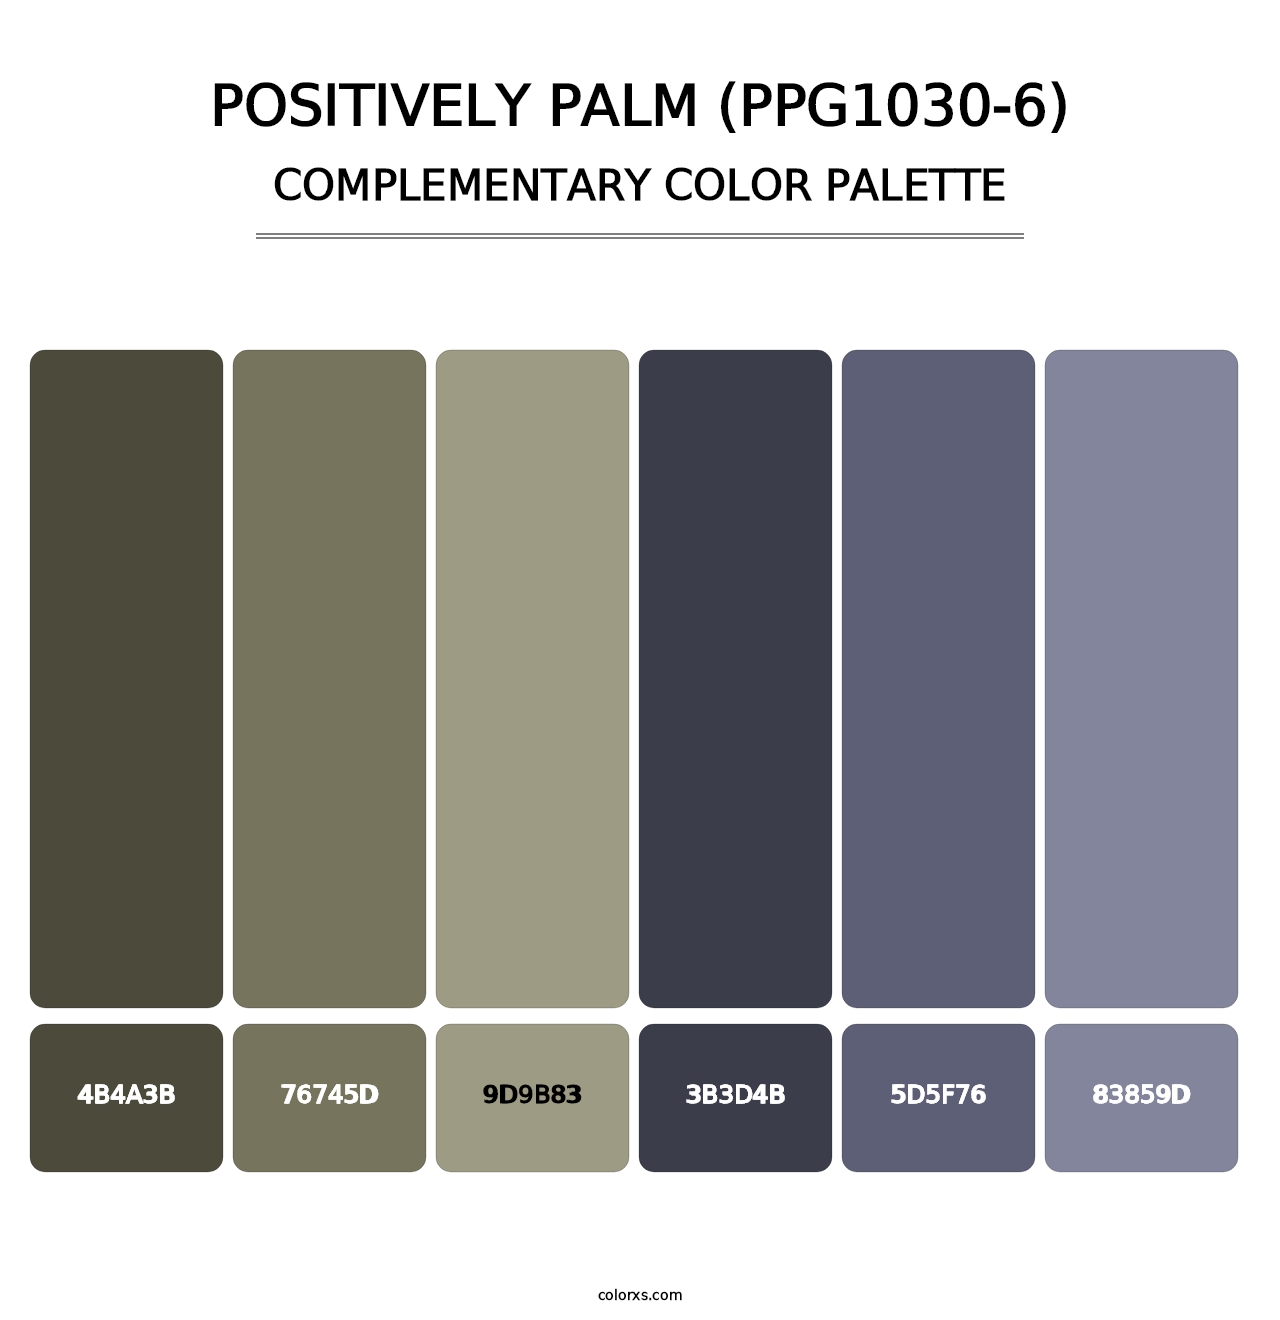 Positively Palm (PPG1030-6) - Complementary Color Palette